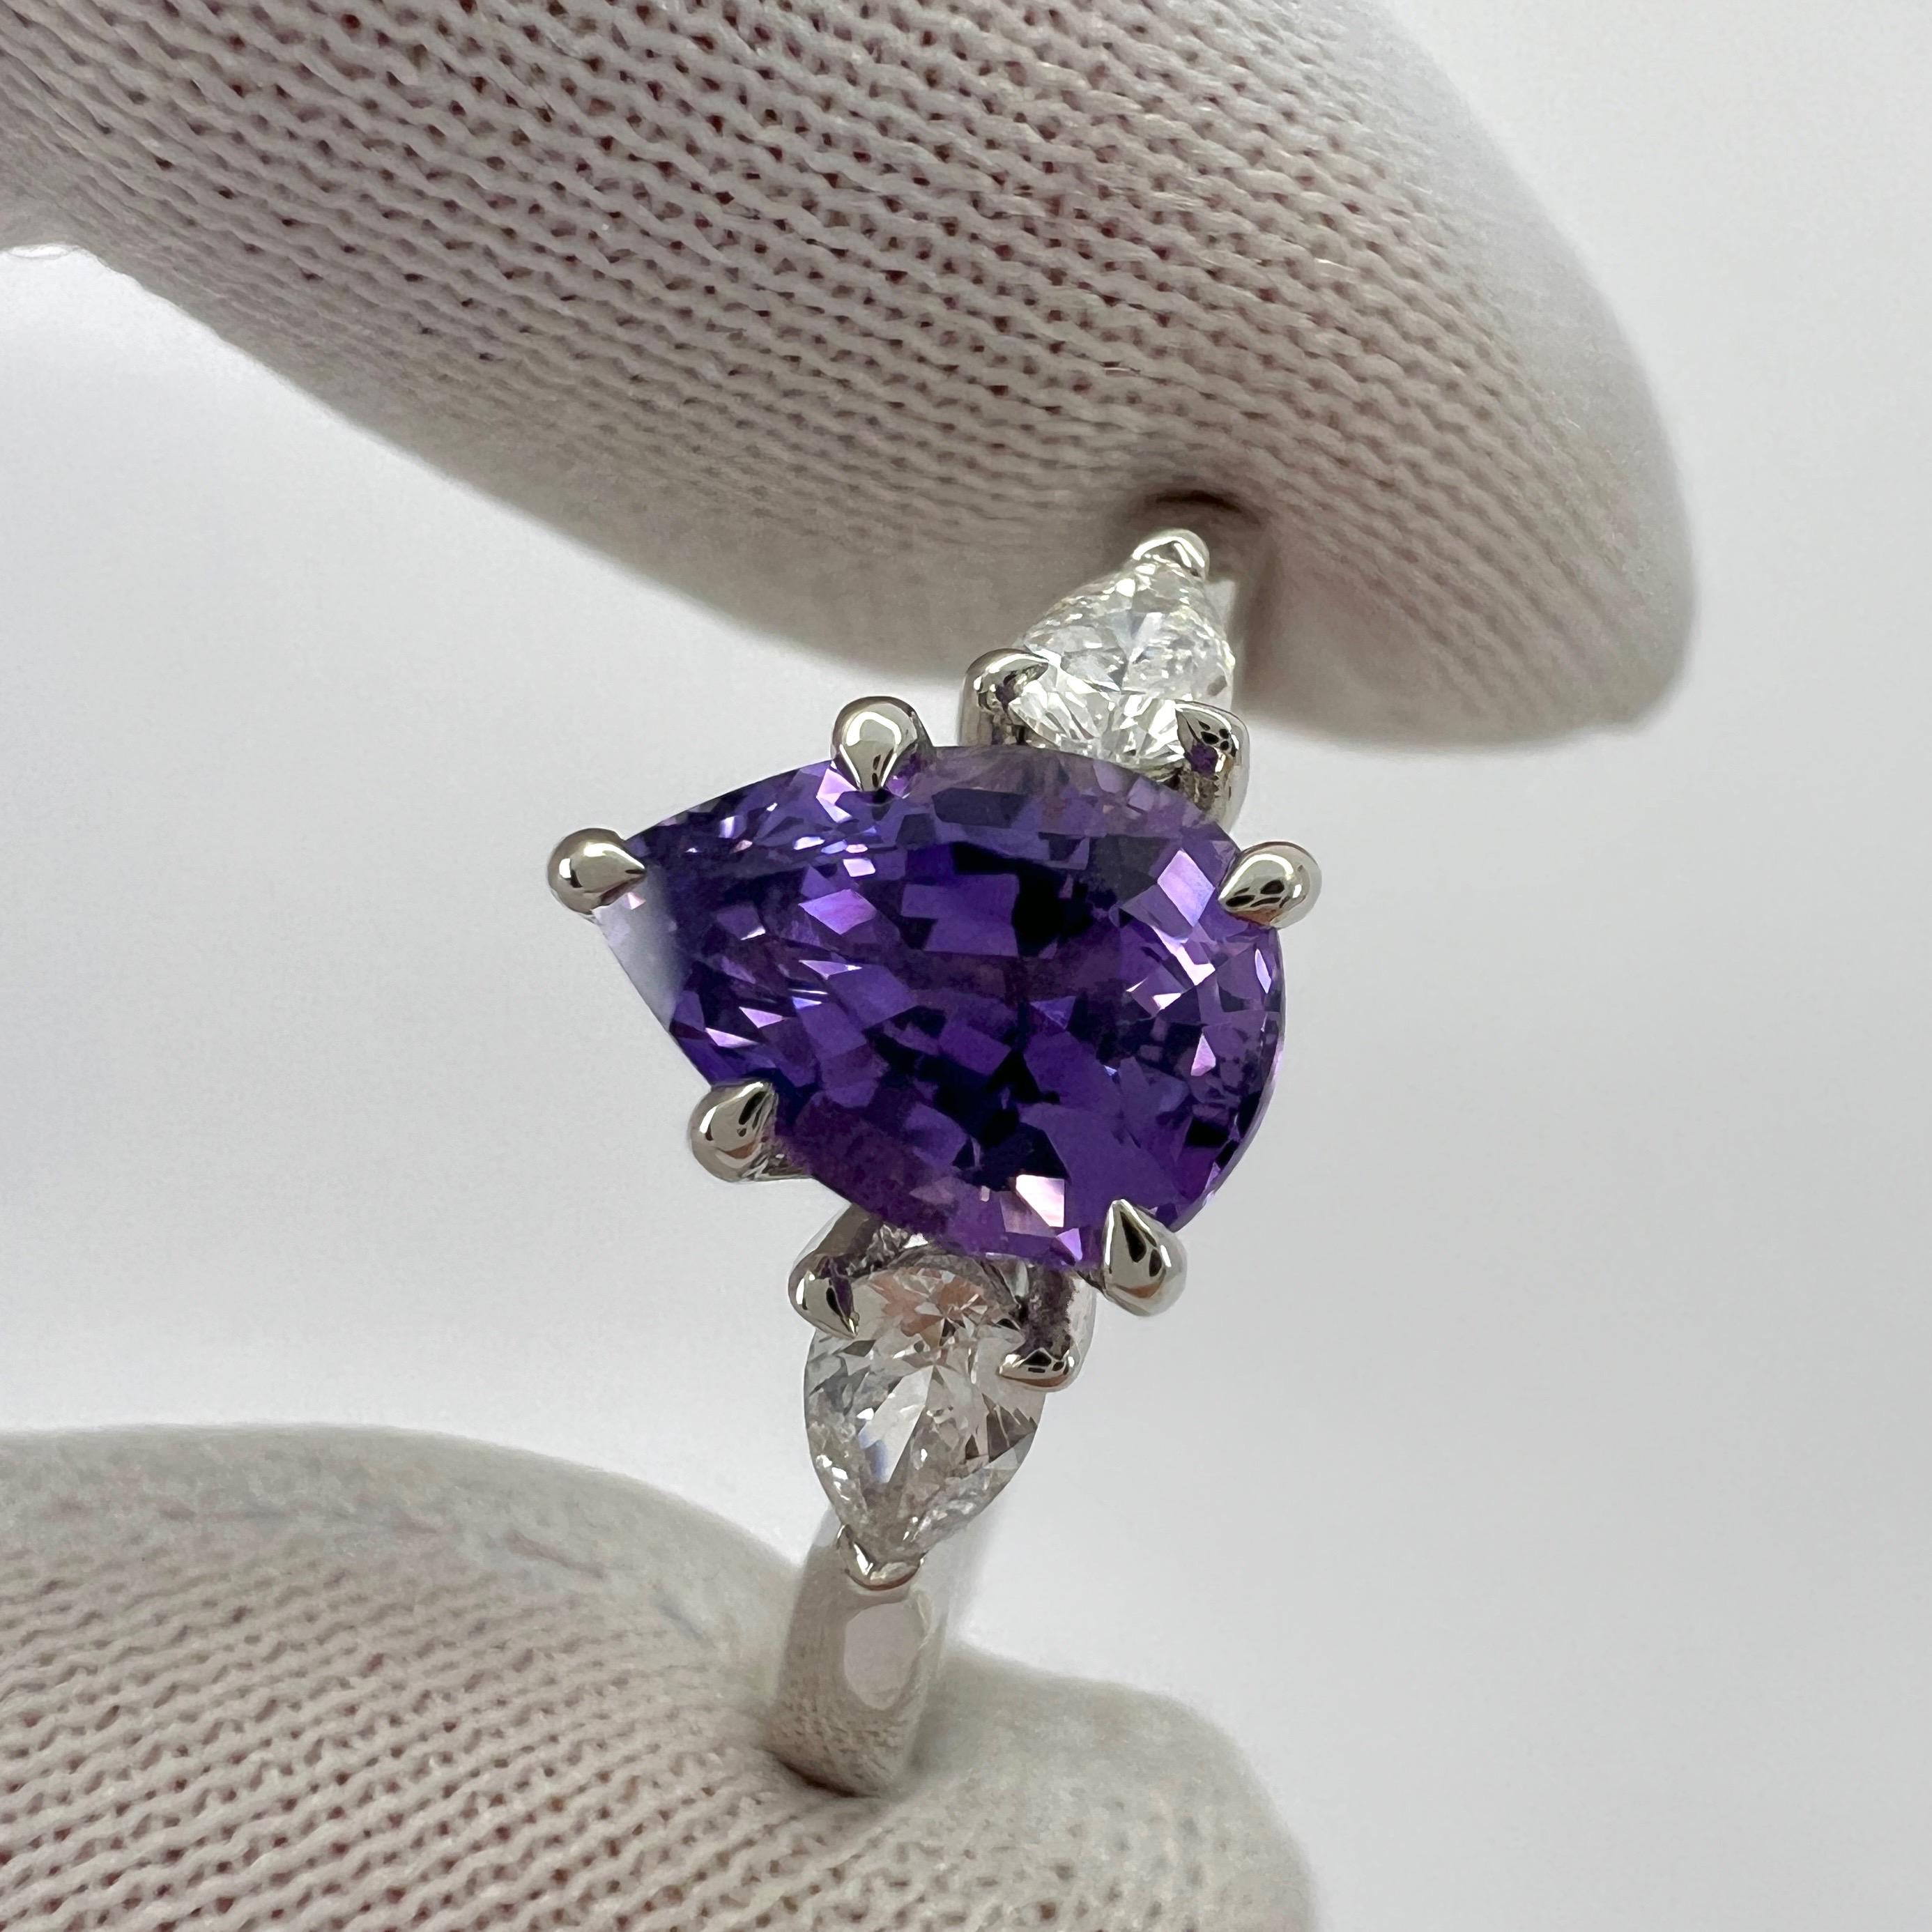 GIA Certified Untreated Pear Cut Purple Sapphire & Diamond 18k White Gold Three Stone Ring.

Fine 1.17 carat natural untreated sapphire with a beautiful vivid pink purple colour. This stone also has an excellent pear teardrop cut and excellent